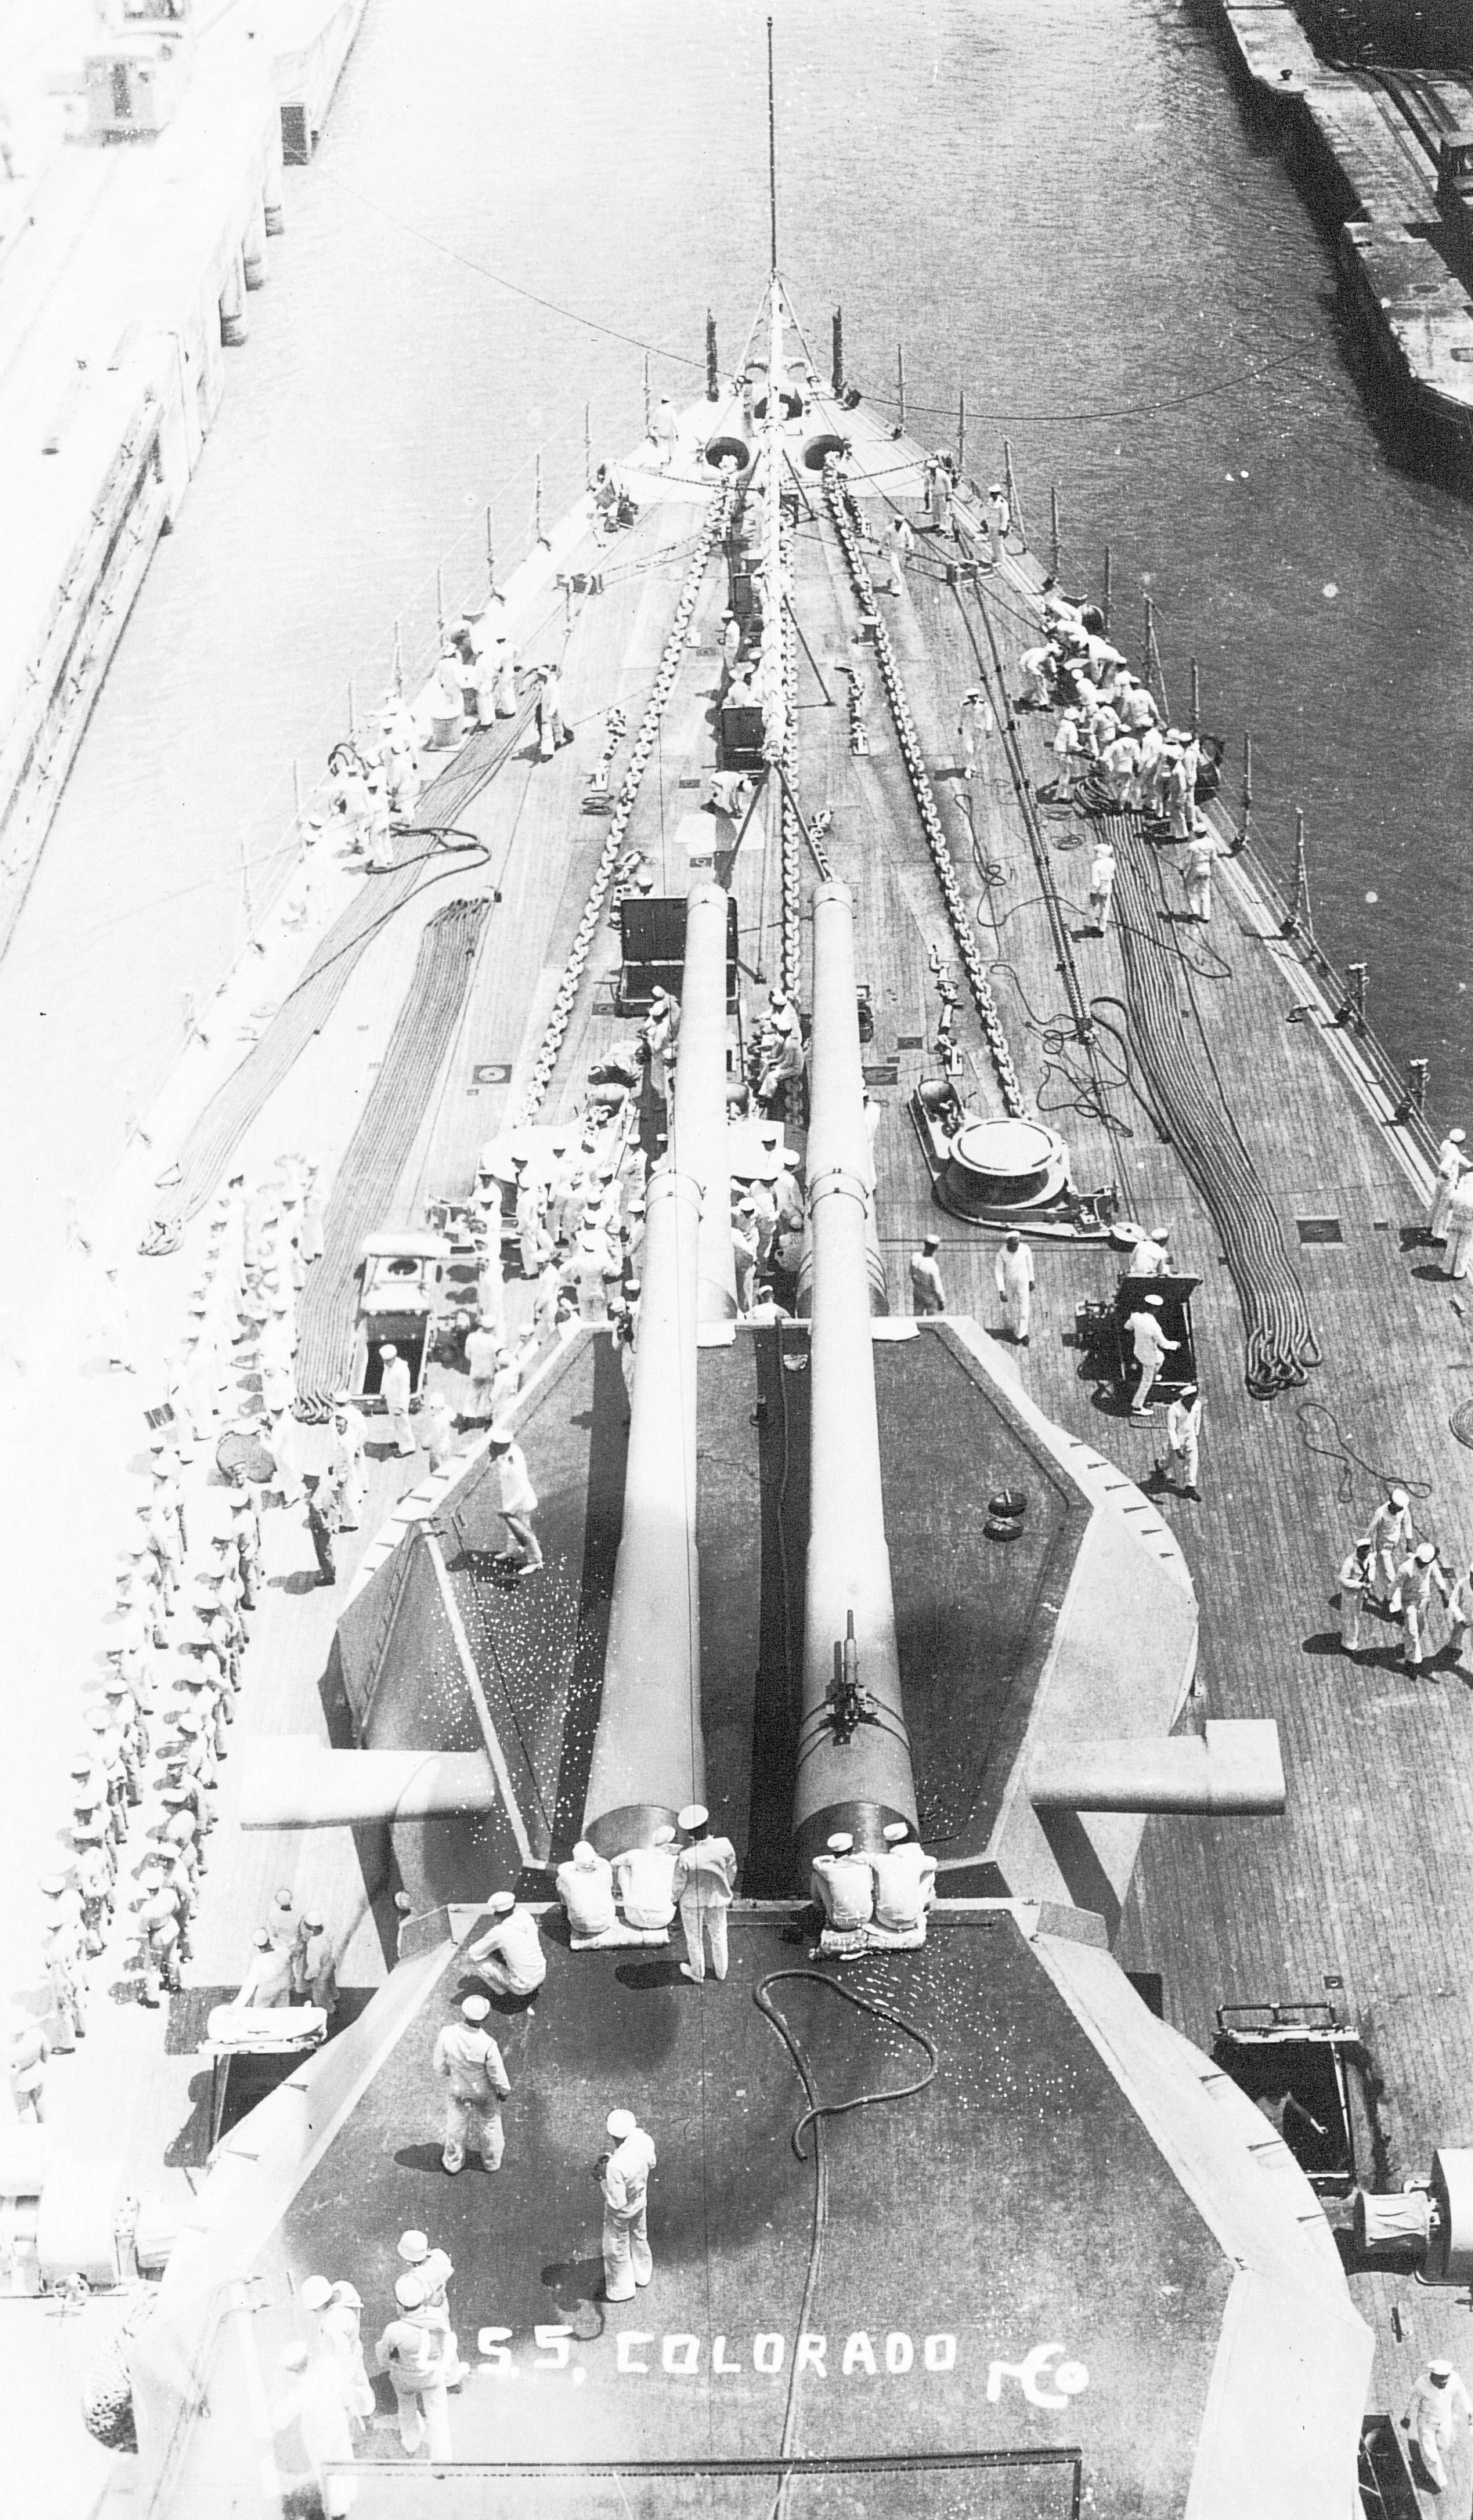 View of the bow of USS Colorado, mid-1920s